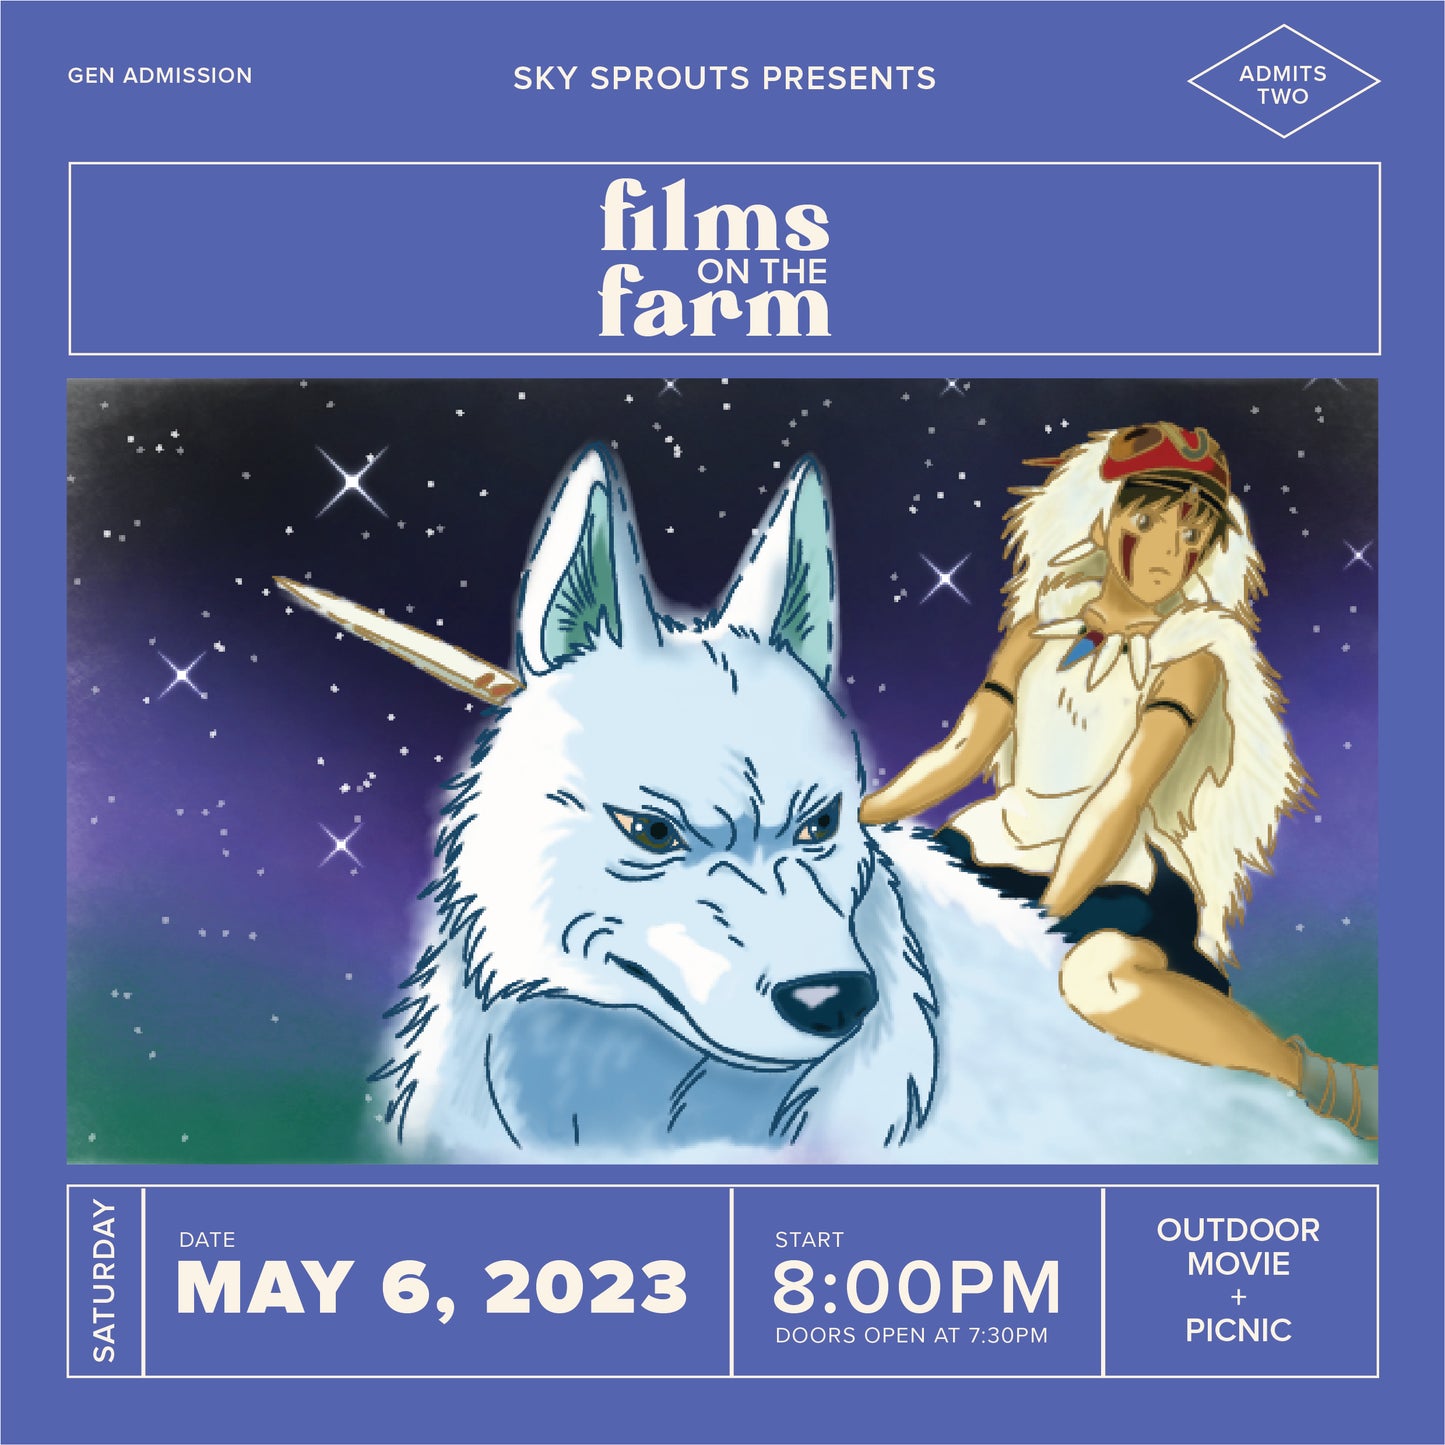 Films on the Farm | Outdoor movie screening & picnic in May!